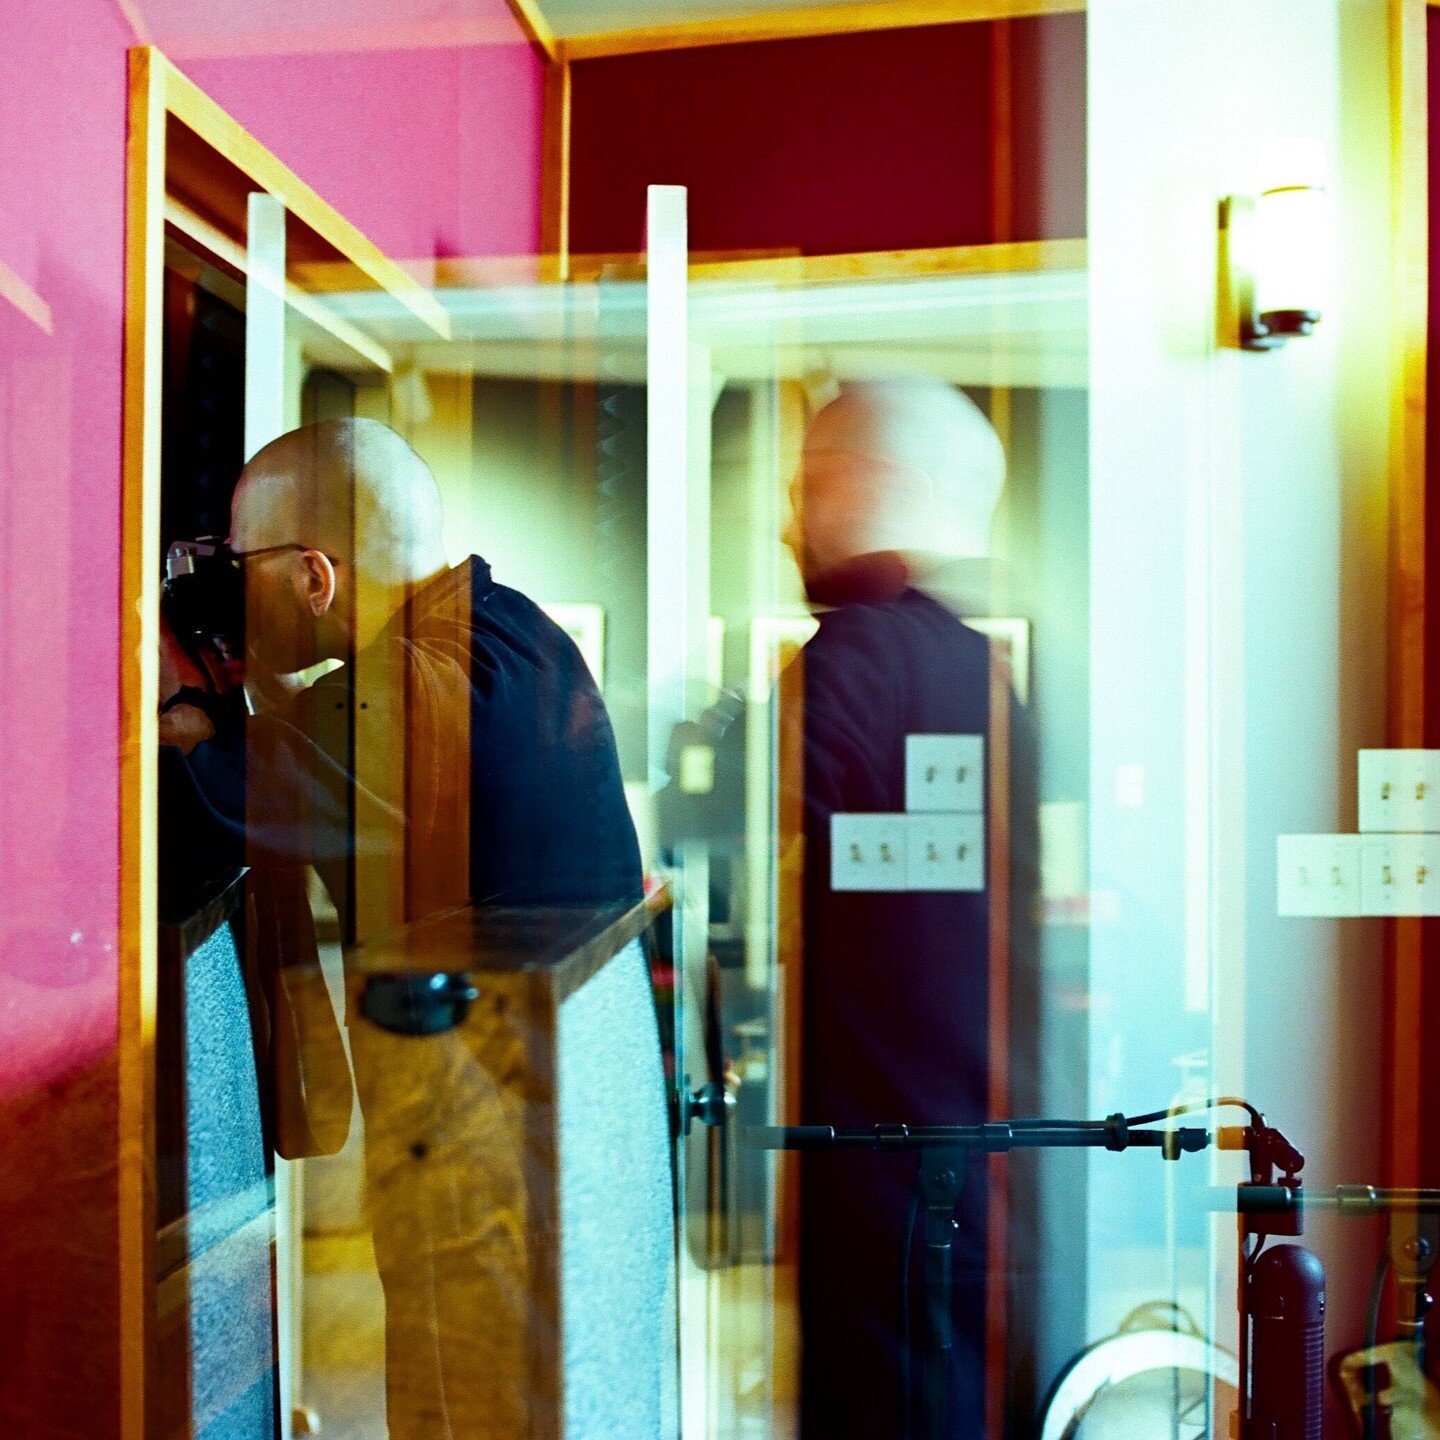 A double exposure (from my trusty old Nikon) of Austin Hatch (@StrangeLibraryRecords) taking photos during our fall session at @GhostHitRecording, in the midst of a big project. More on that later. Oh yeah, I'm back.